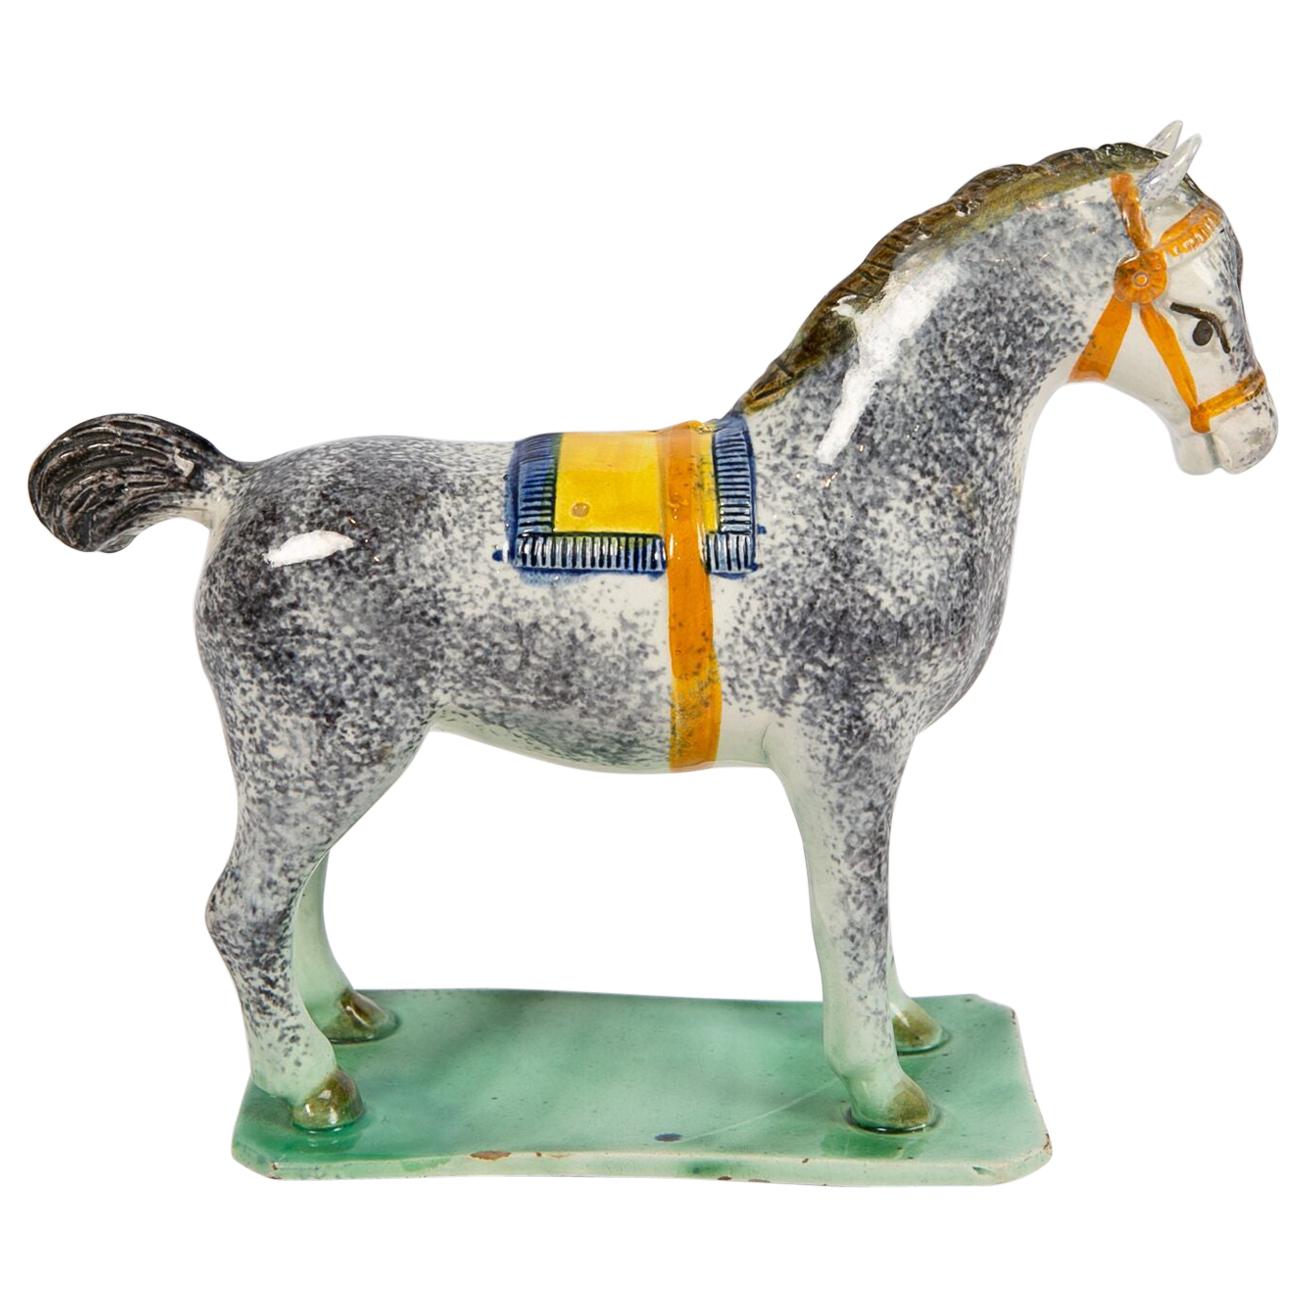 Antique Pottery Horse Made in England at St. Anthony's Pottery, circa 1800-1810